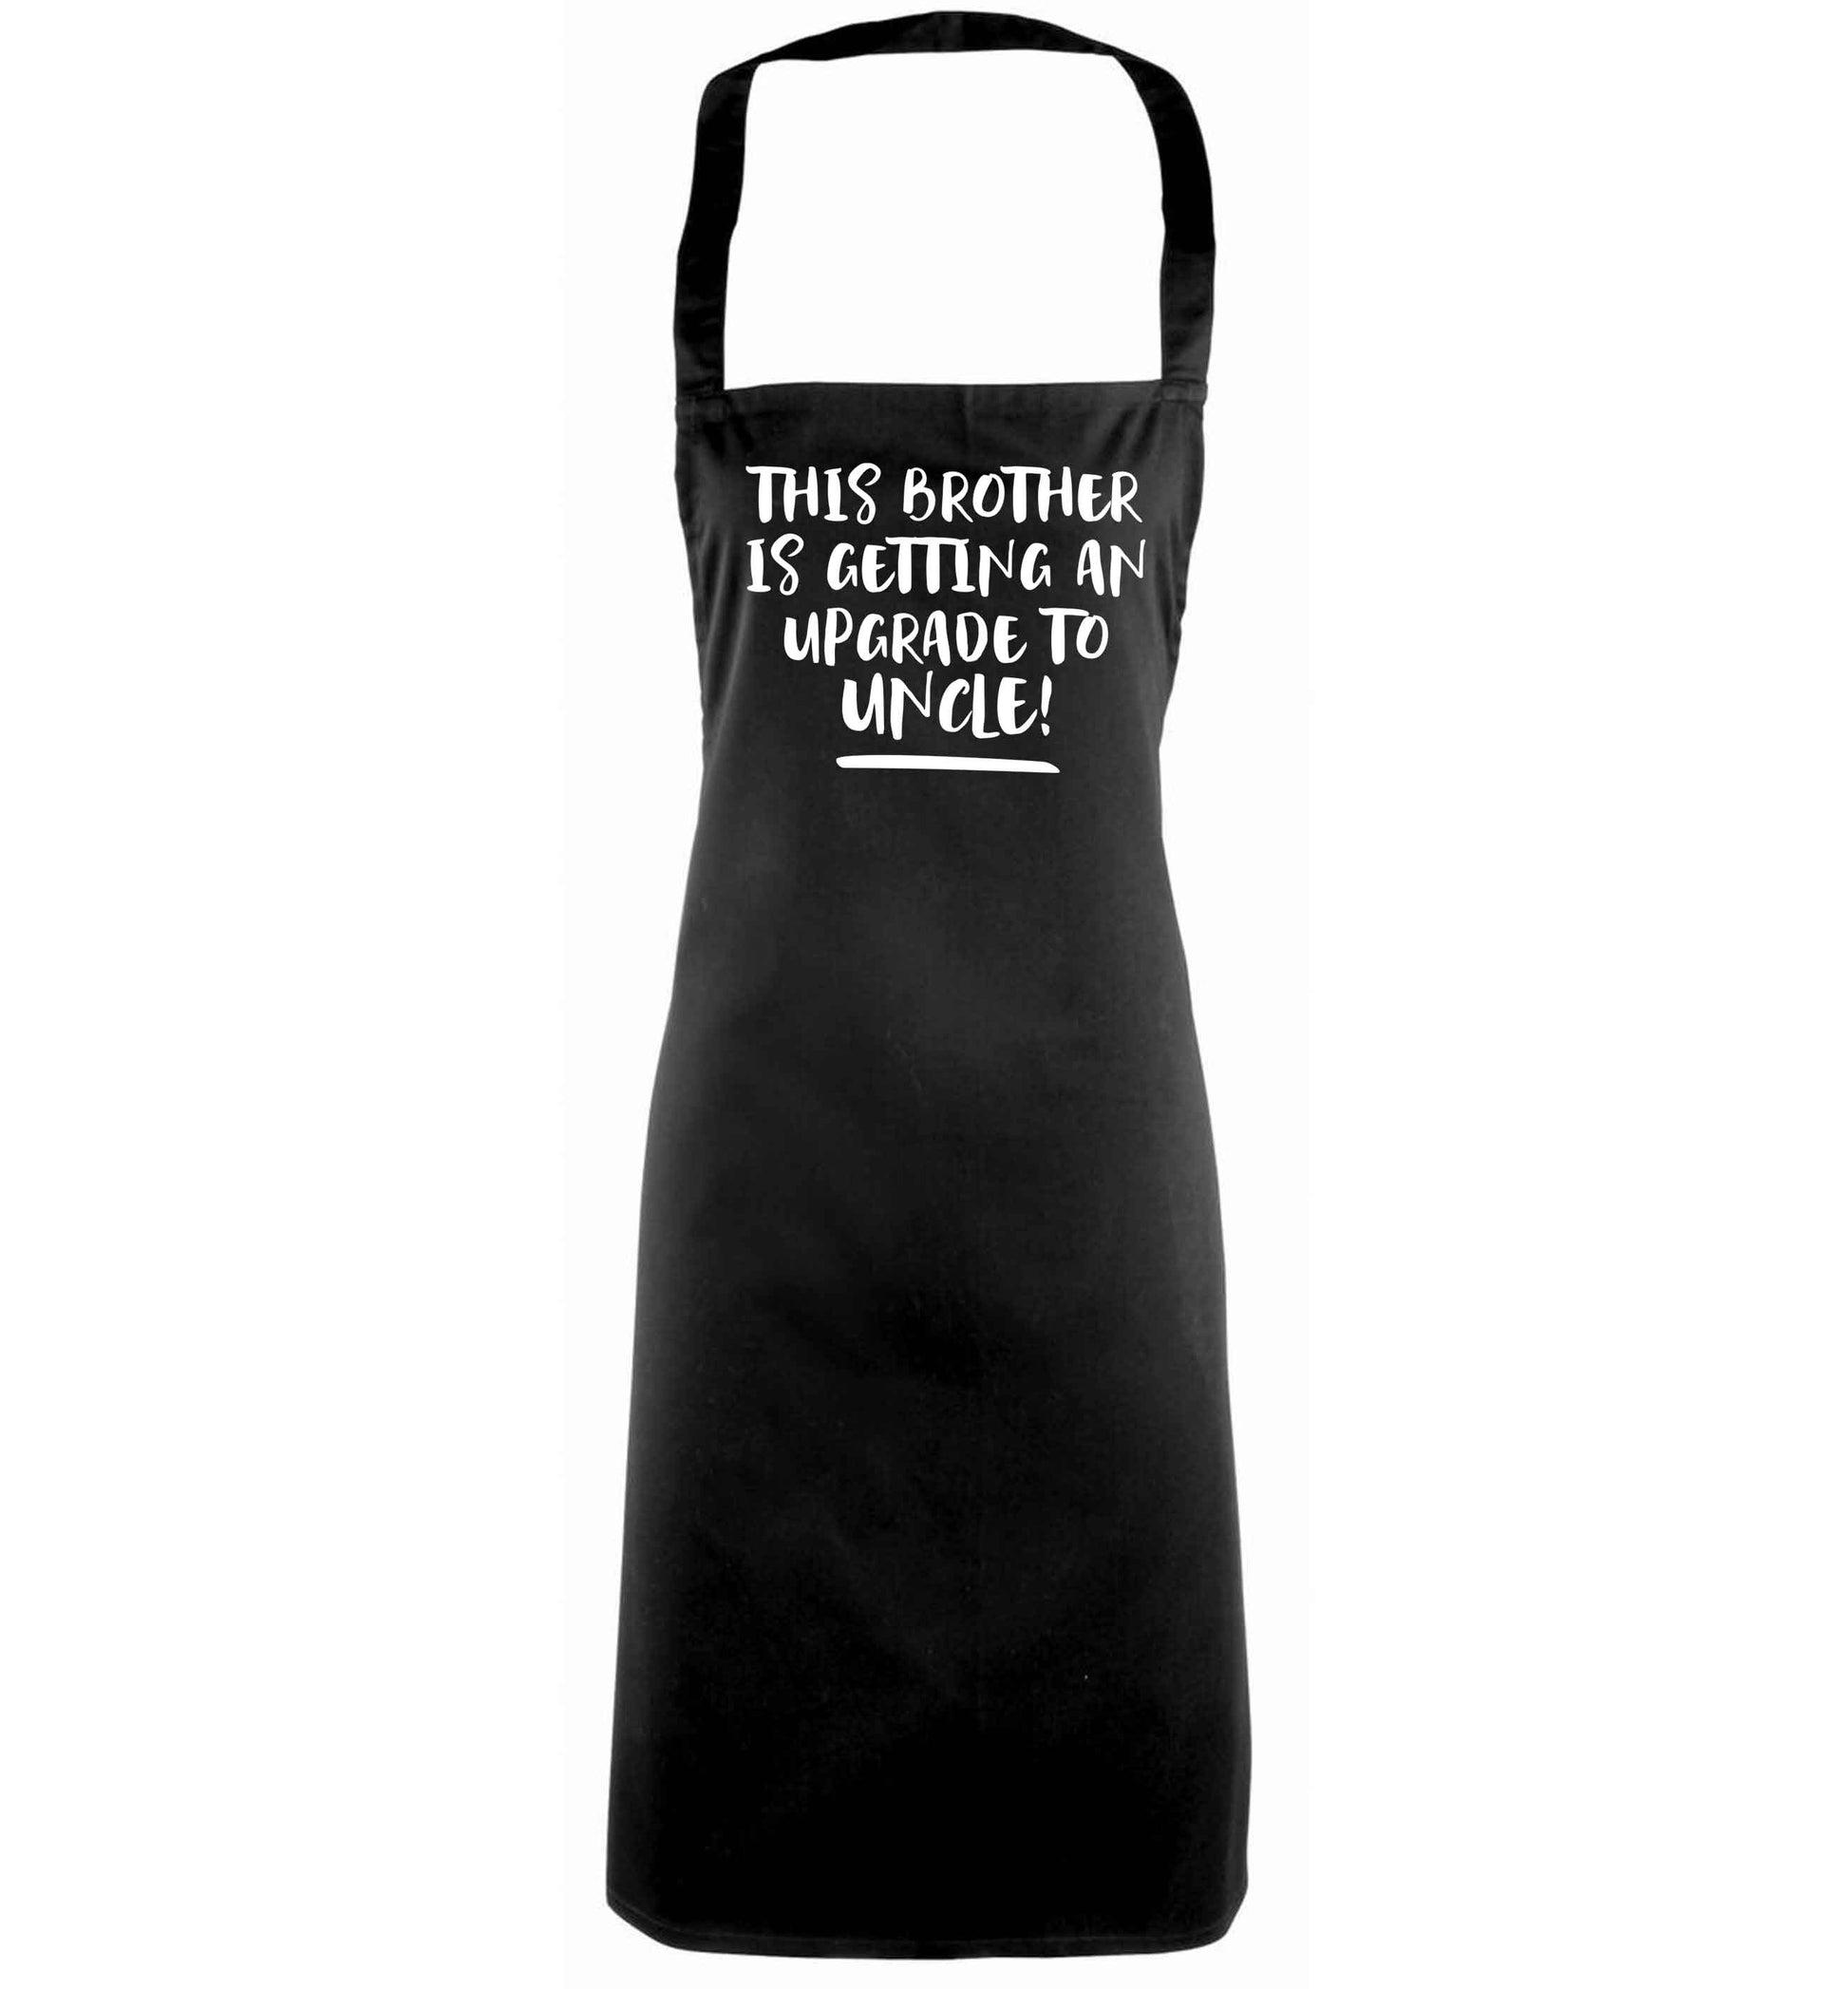 This brother is getting an upgrade to uncle! black apron